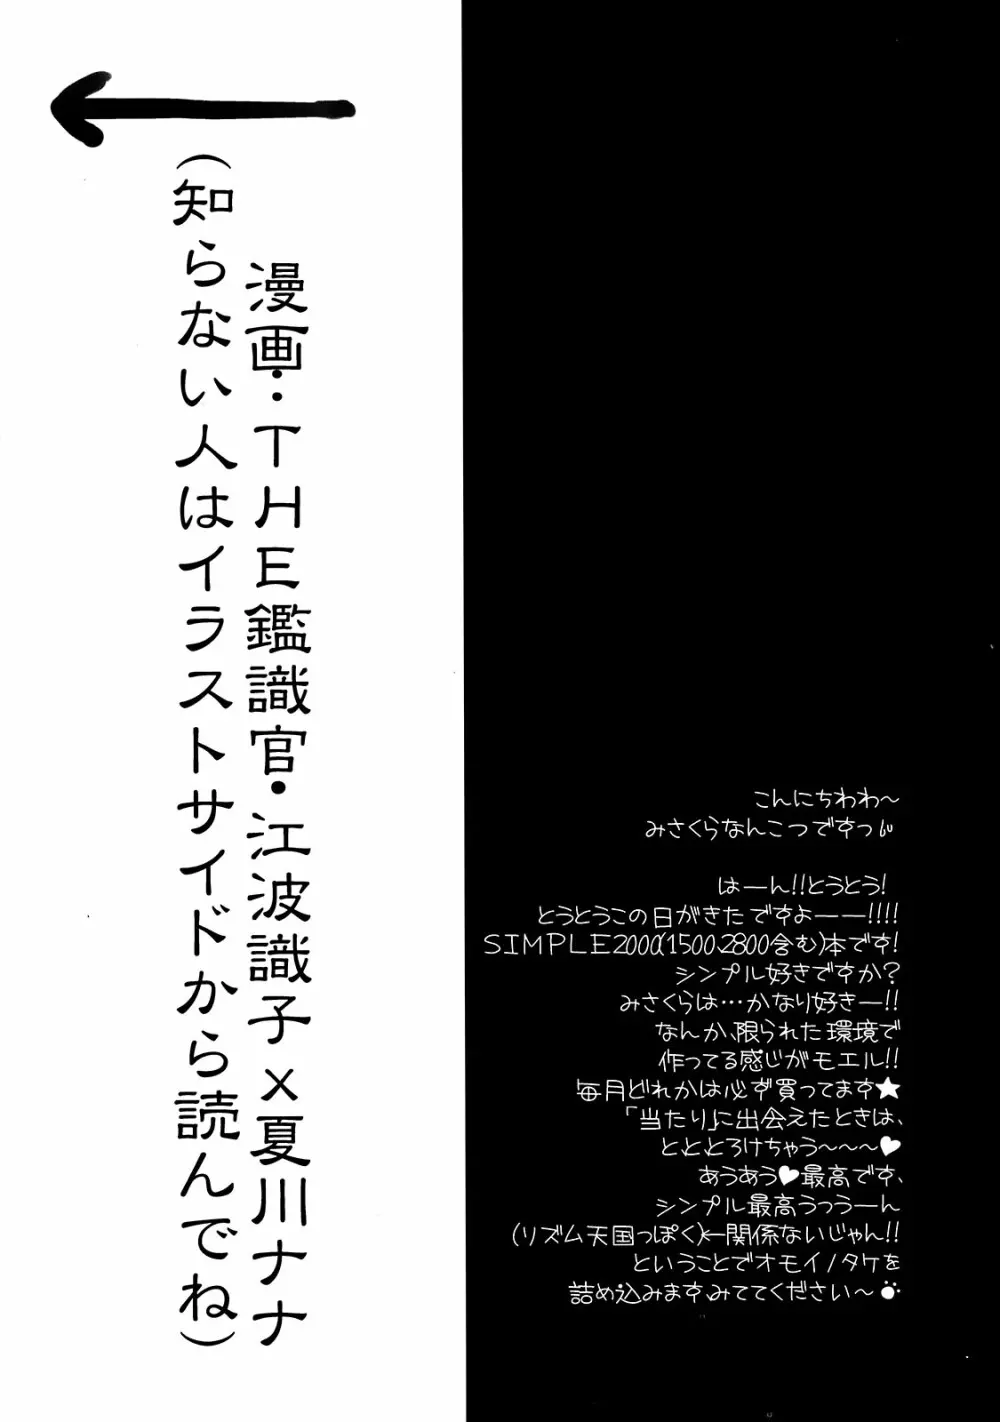 THE SIMPLE ギャル萌え同人誌 Comic Side Page.4